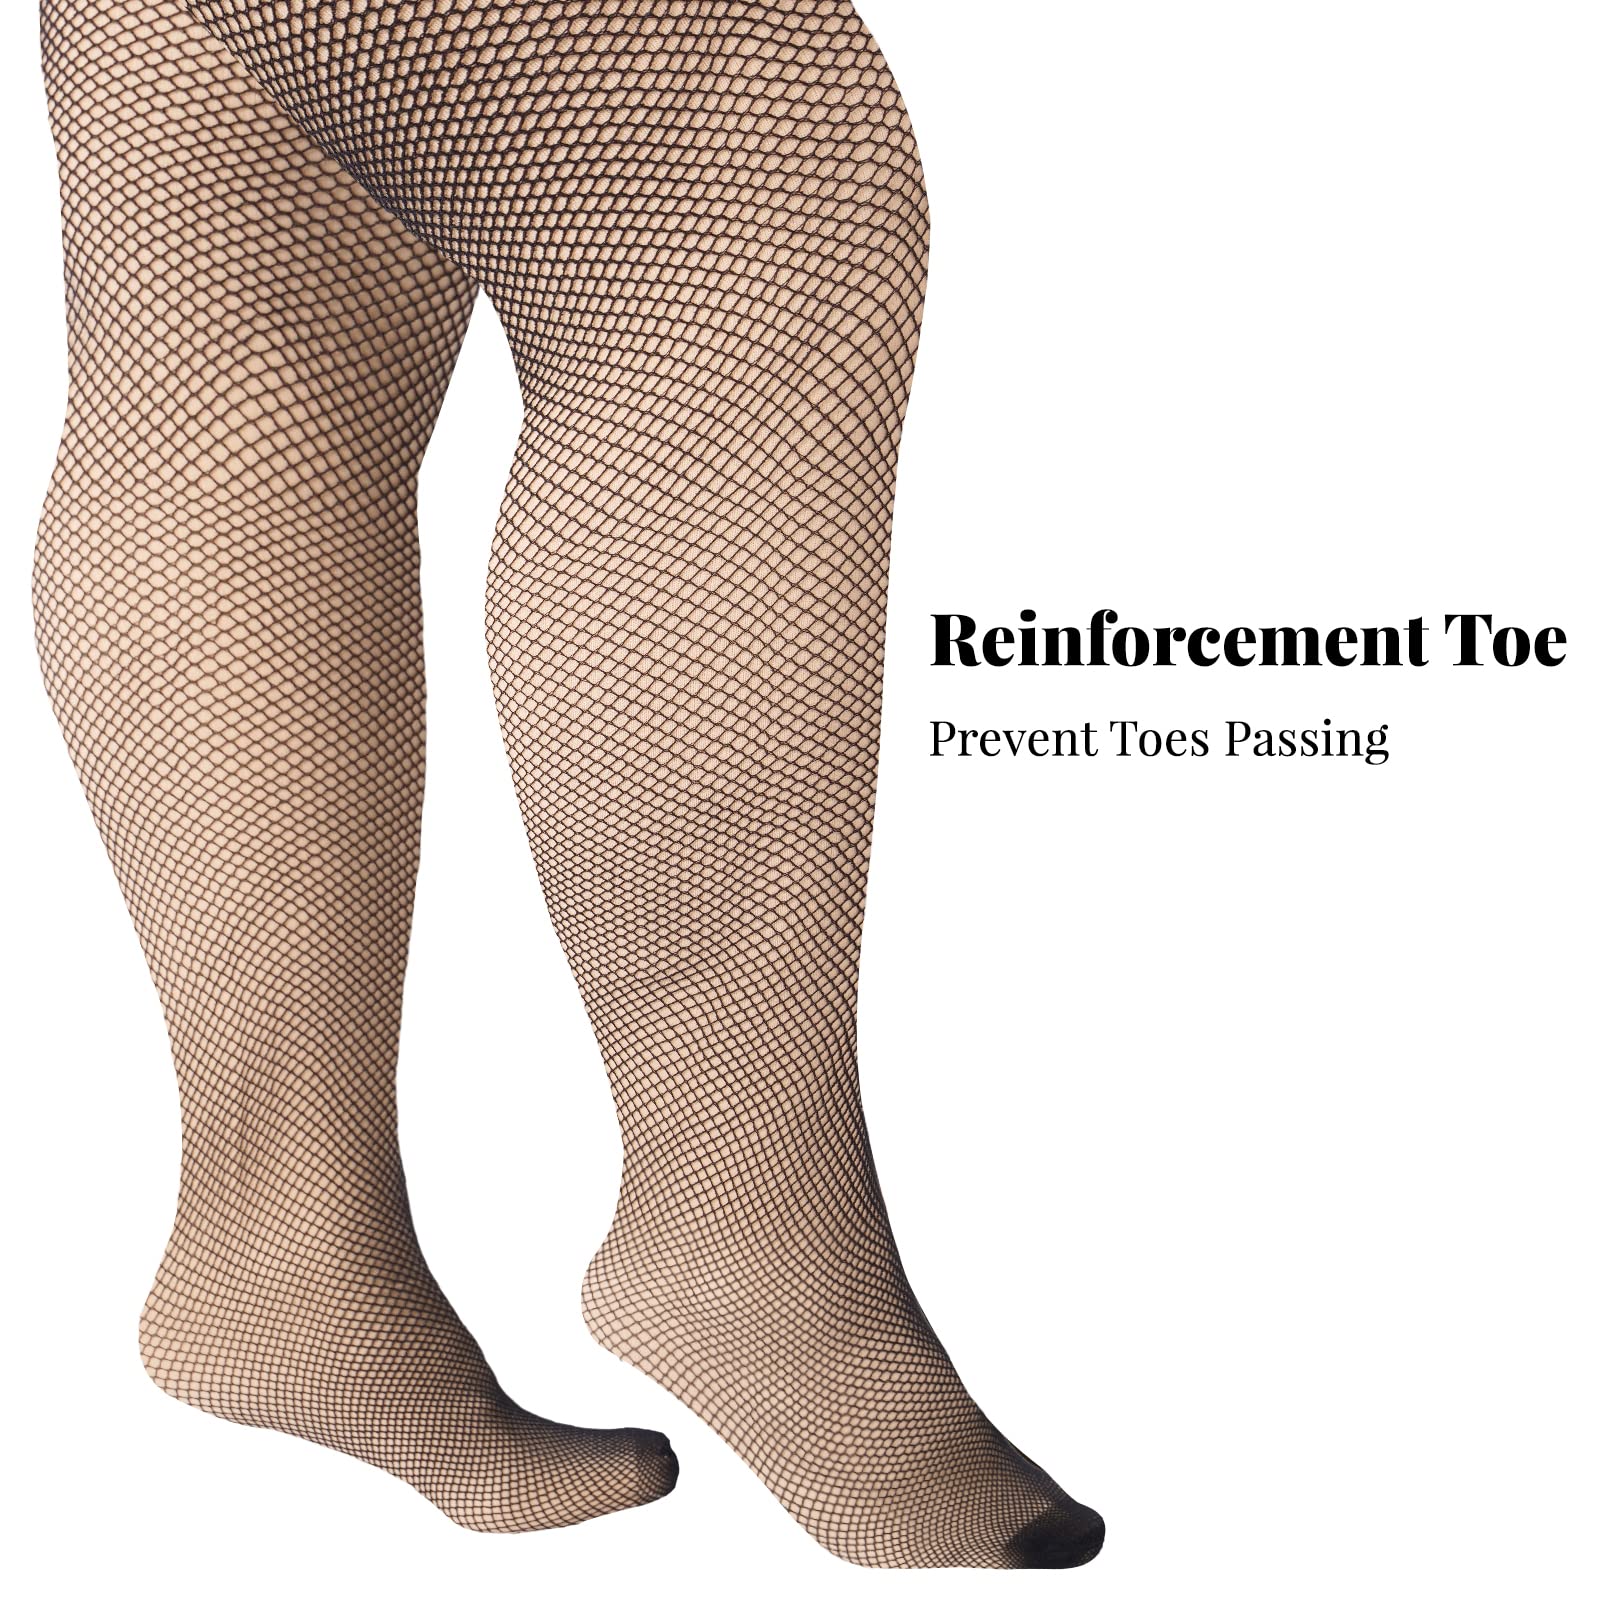 Plus Size Fishnet Stockings Sheer Silicone Lace - Black Small Mesh - Moon Wood